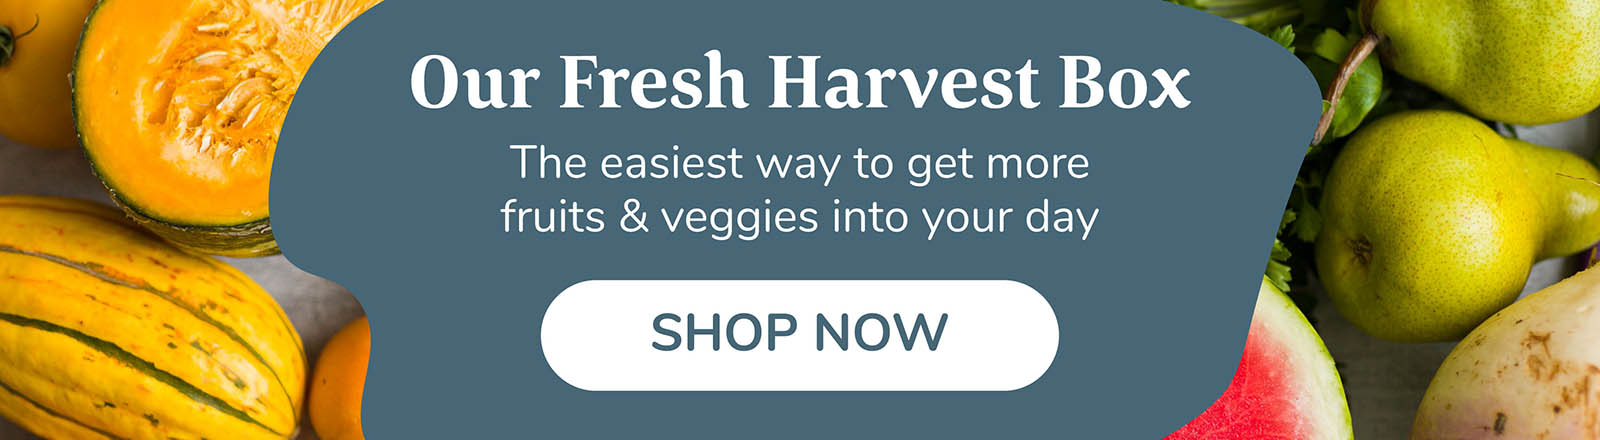 Our fresh harvest box. The easiest way to get fruits and vegetables into your day.